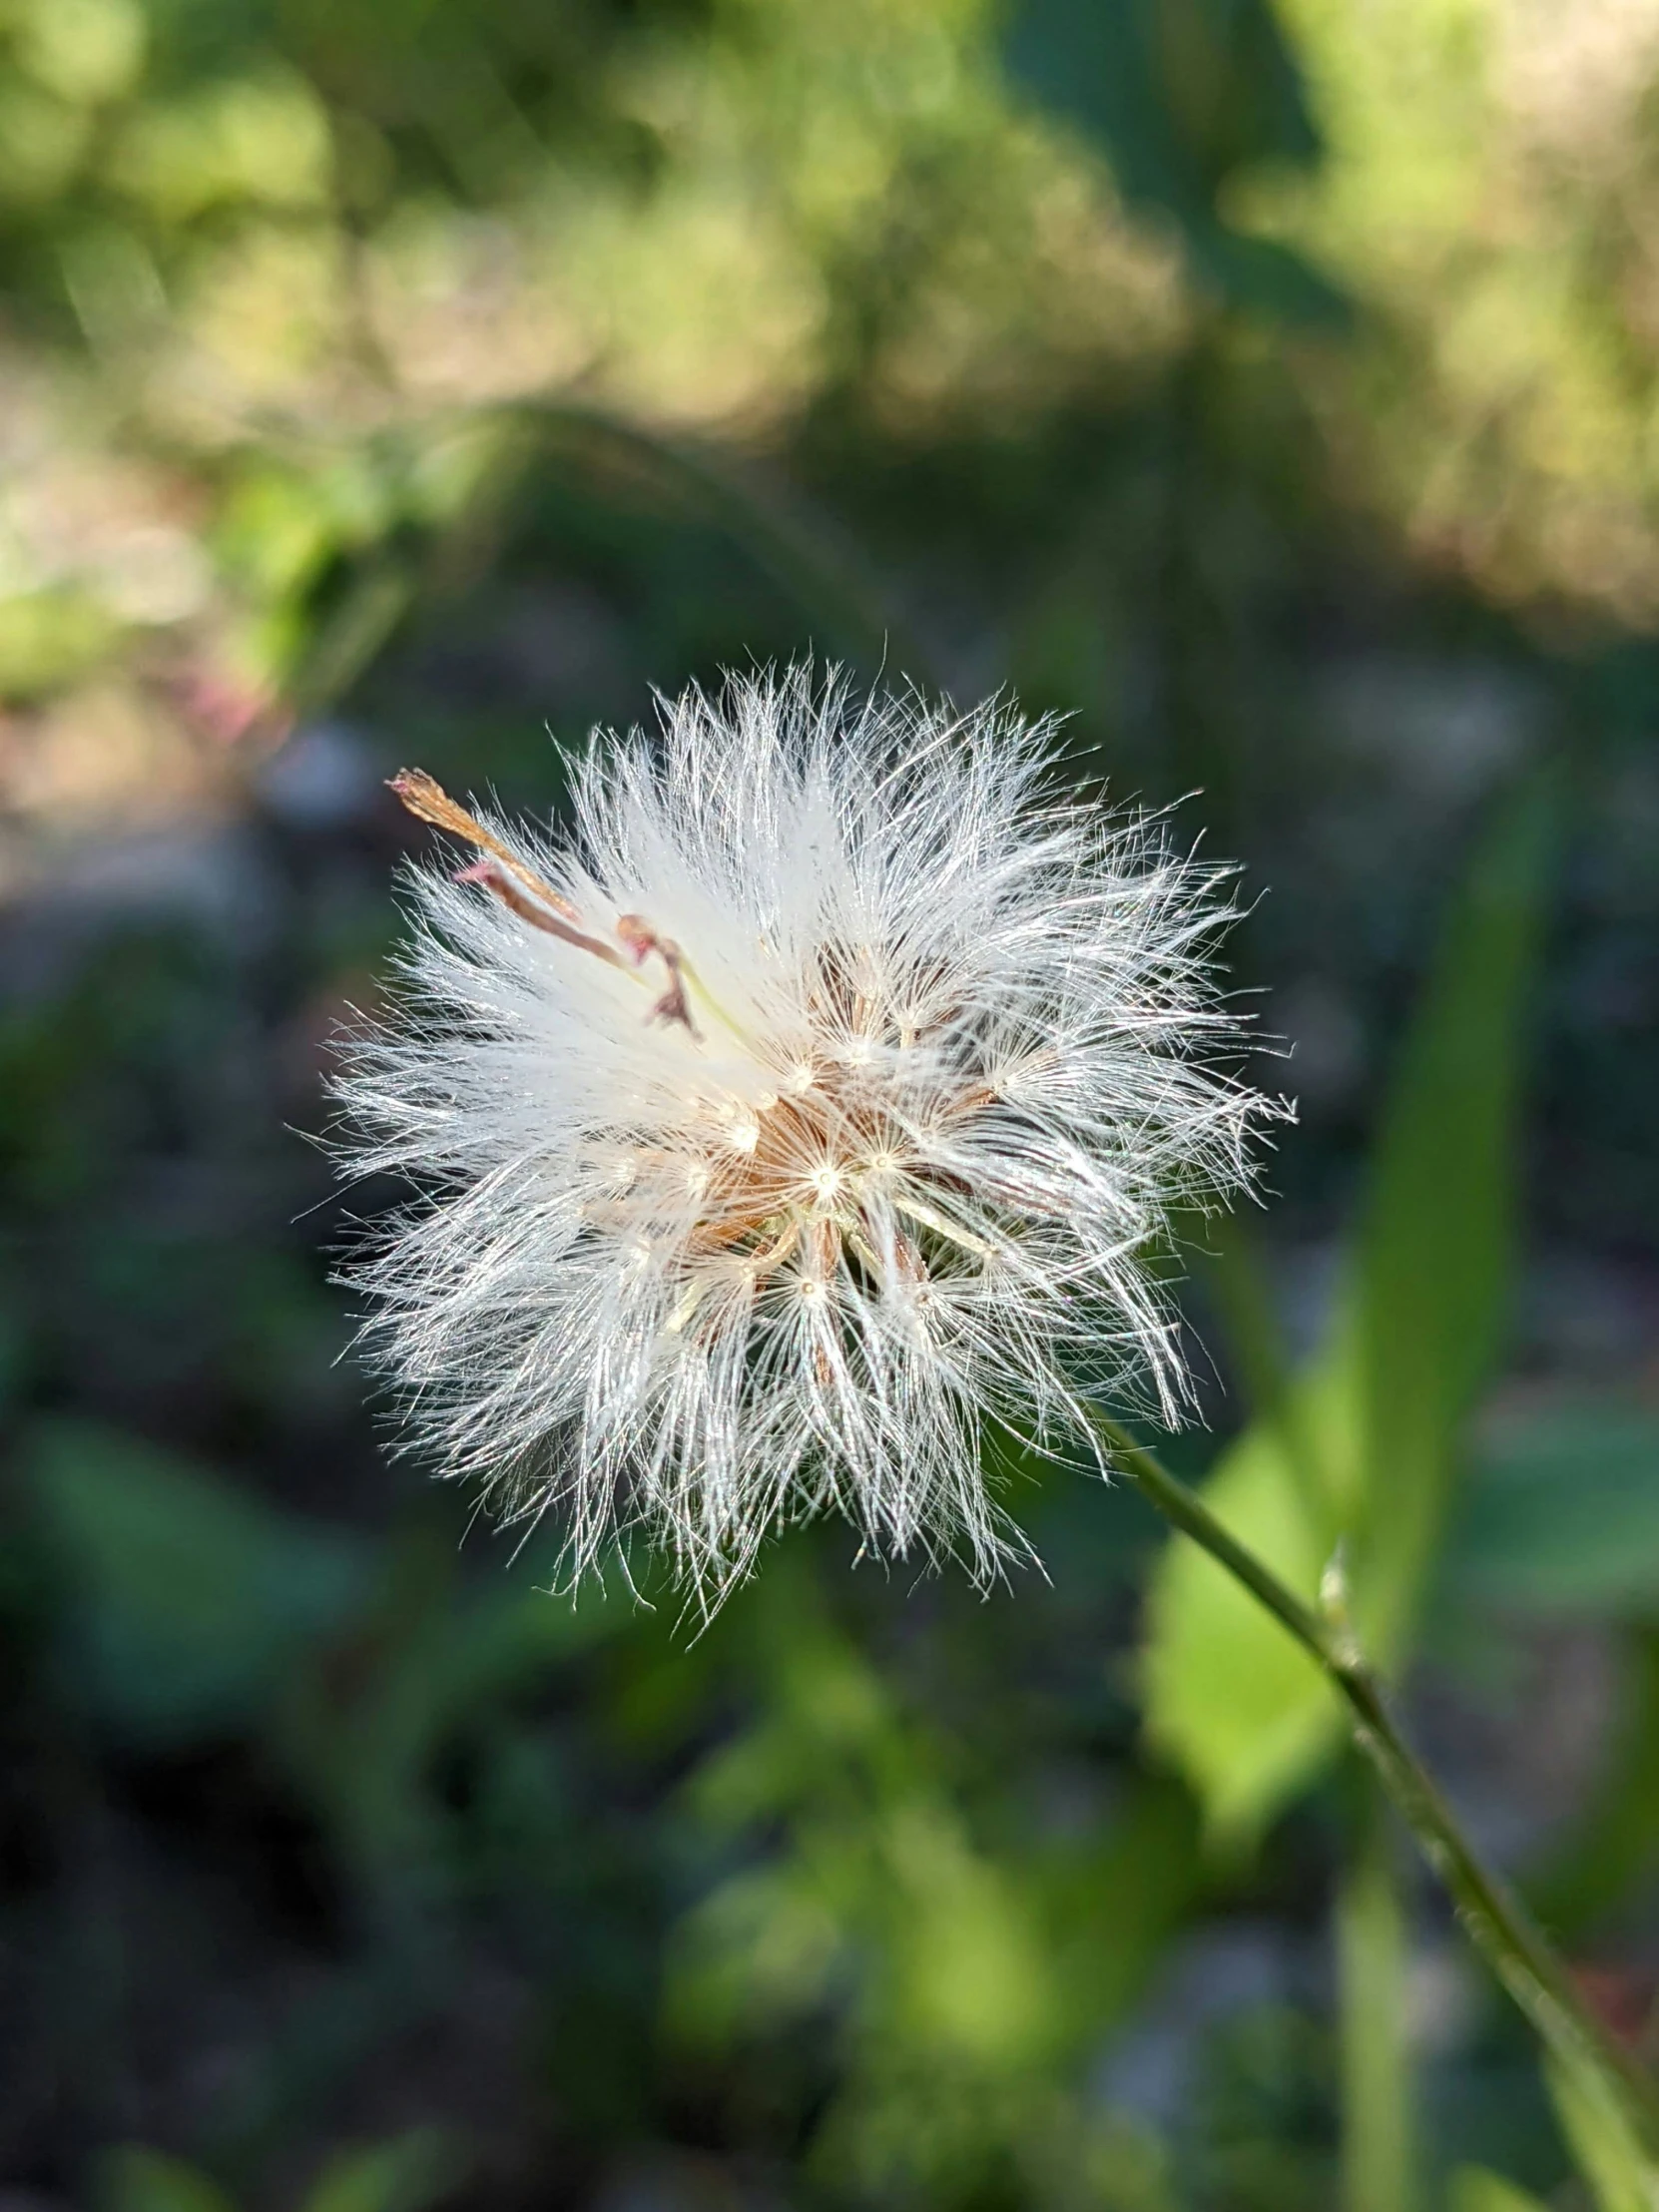 the dandelion is almost gone of the flower